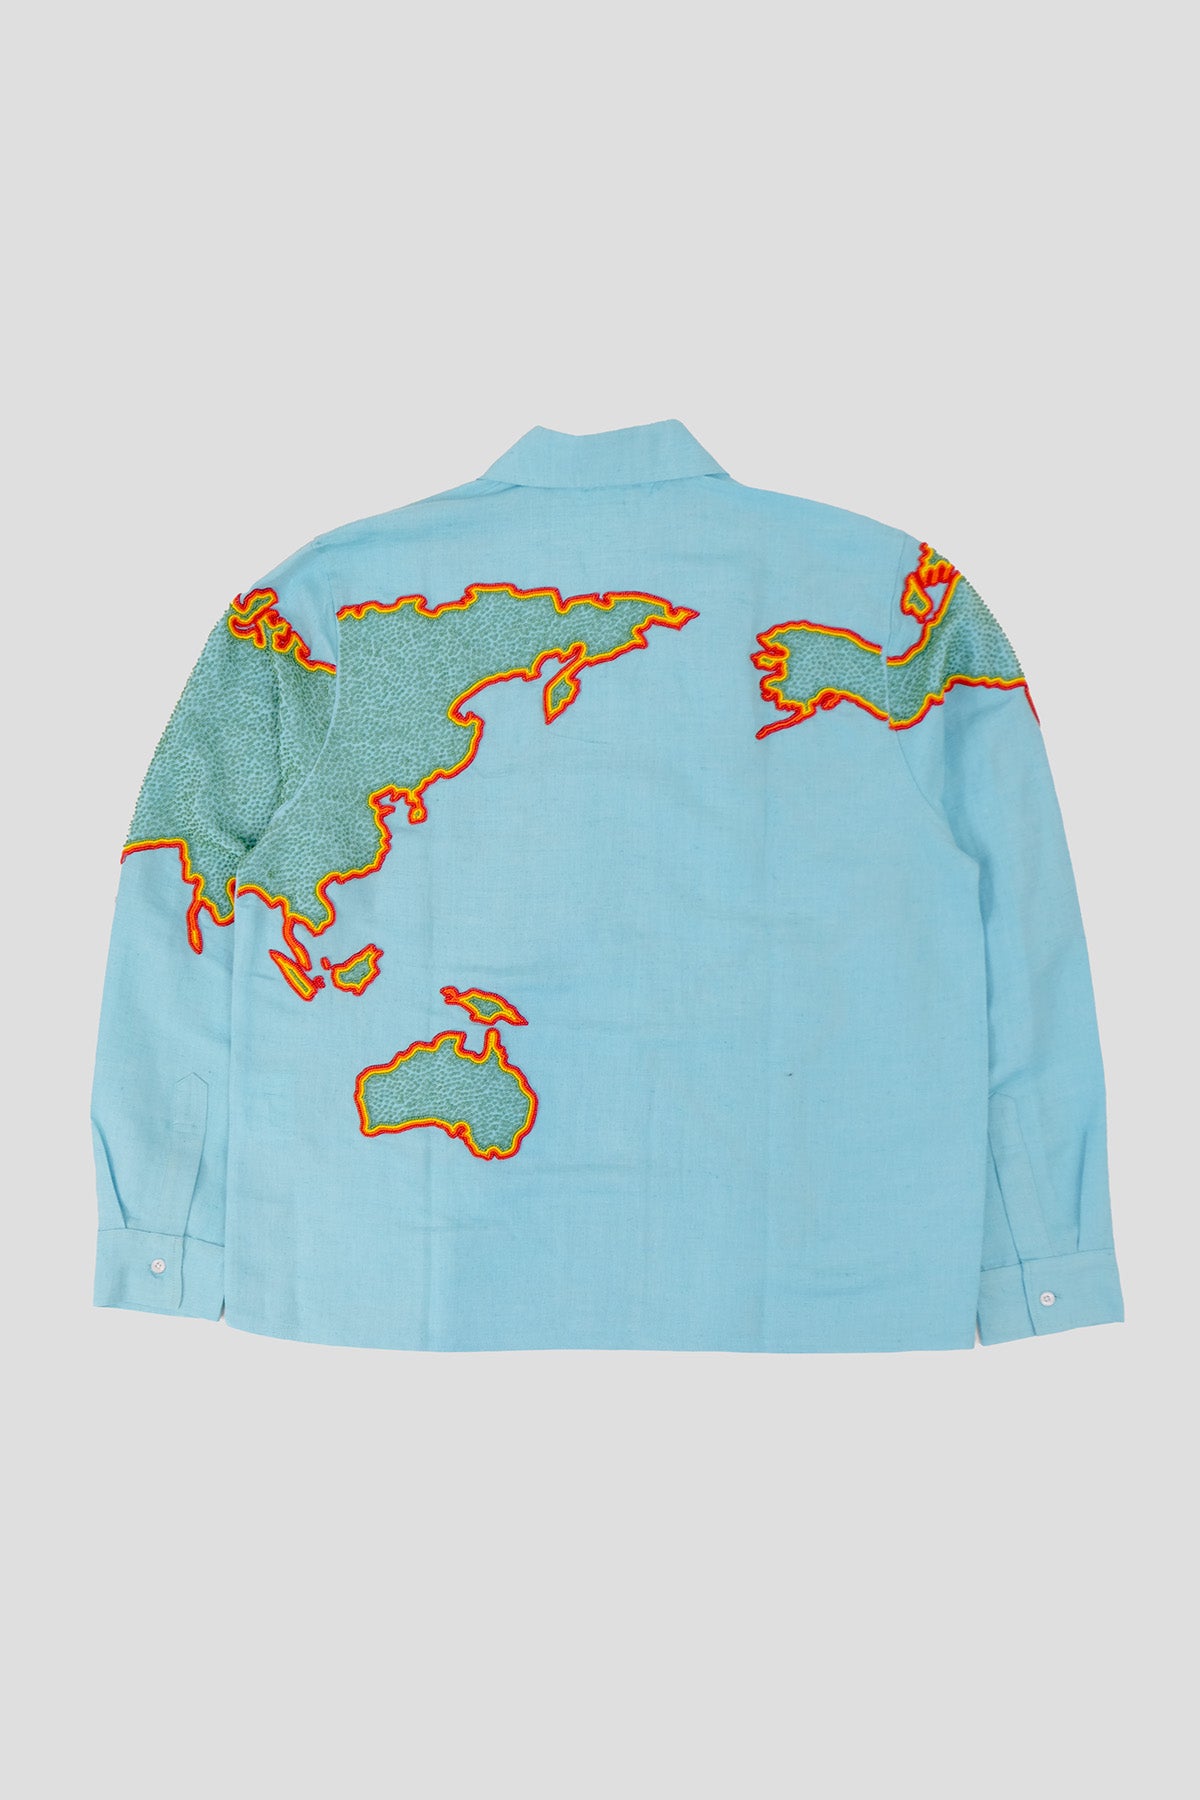 Embroidered World Map Shirt